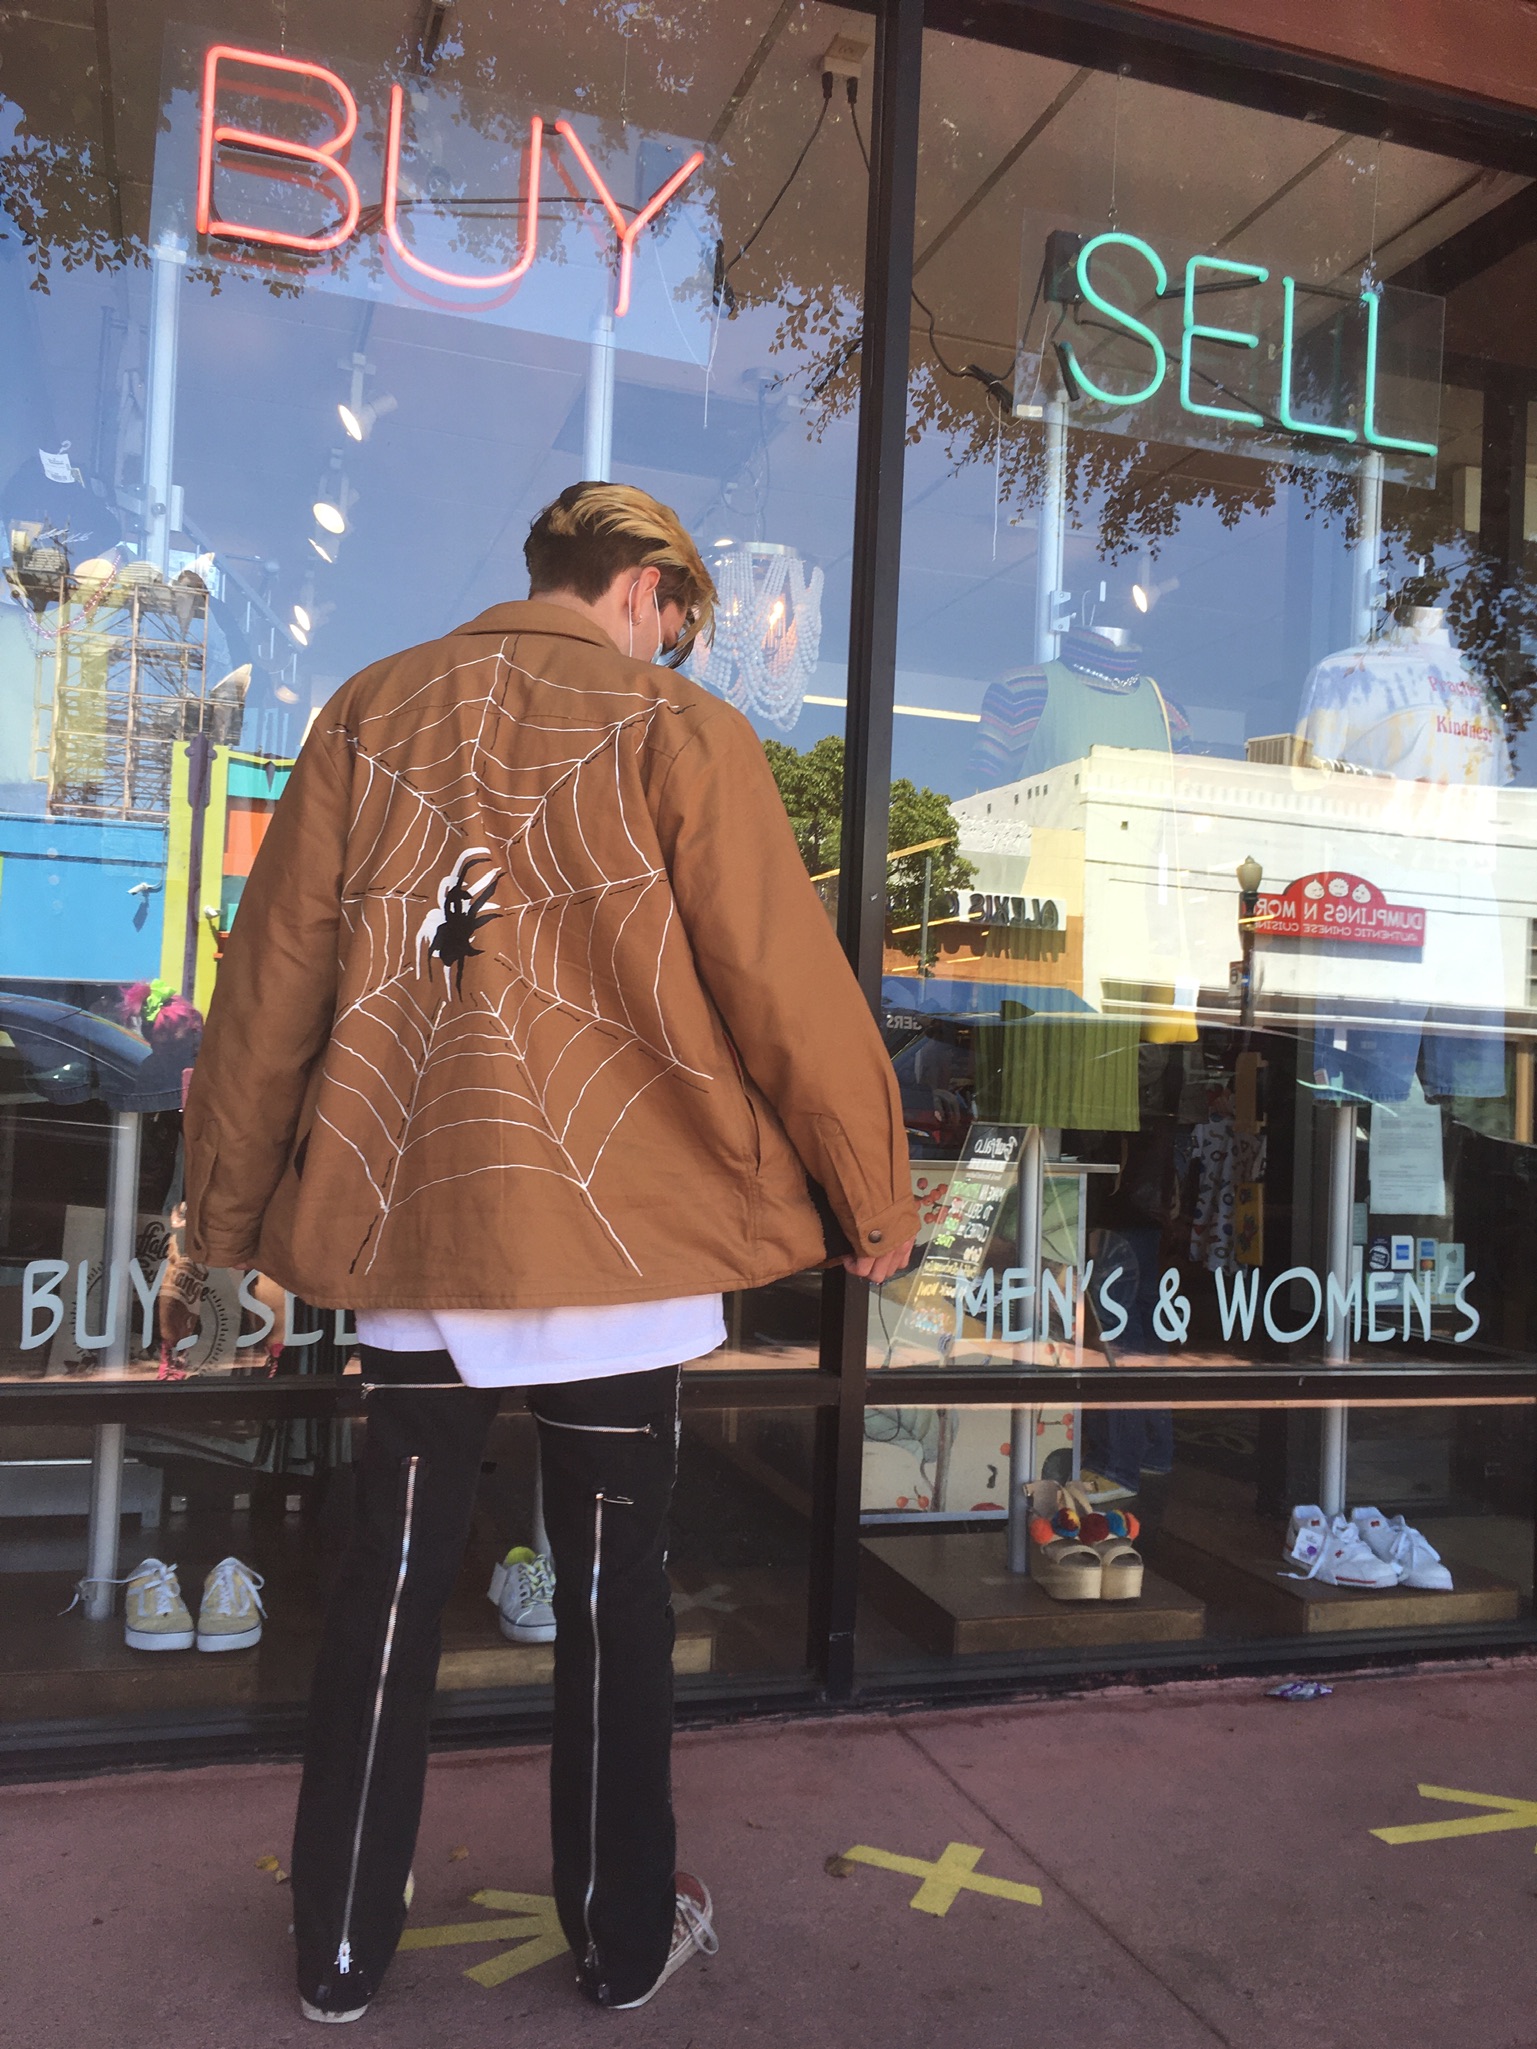 Person standing beneath neon signs reading Buy and Sell with back turned showing hand-painted spider web on brown jacket